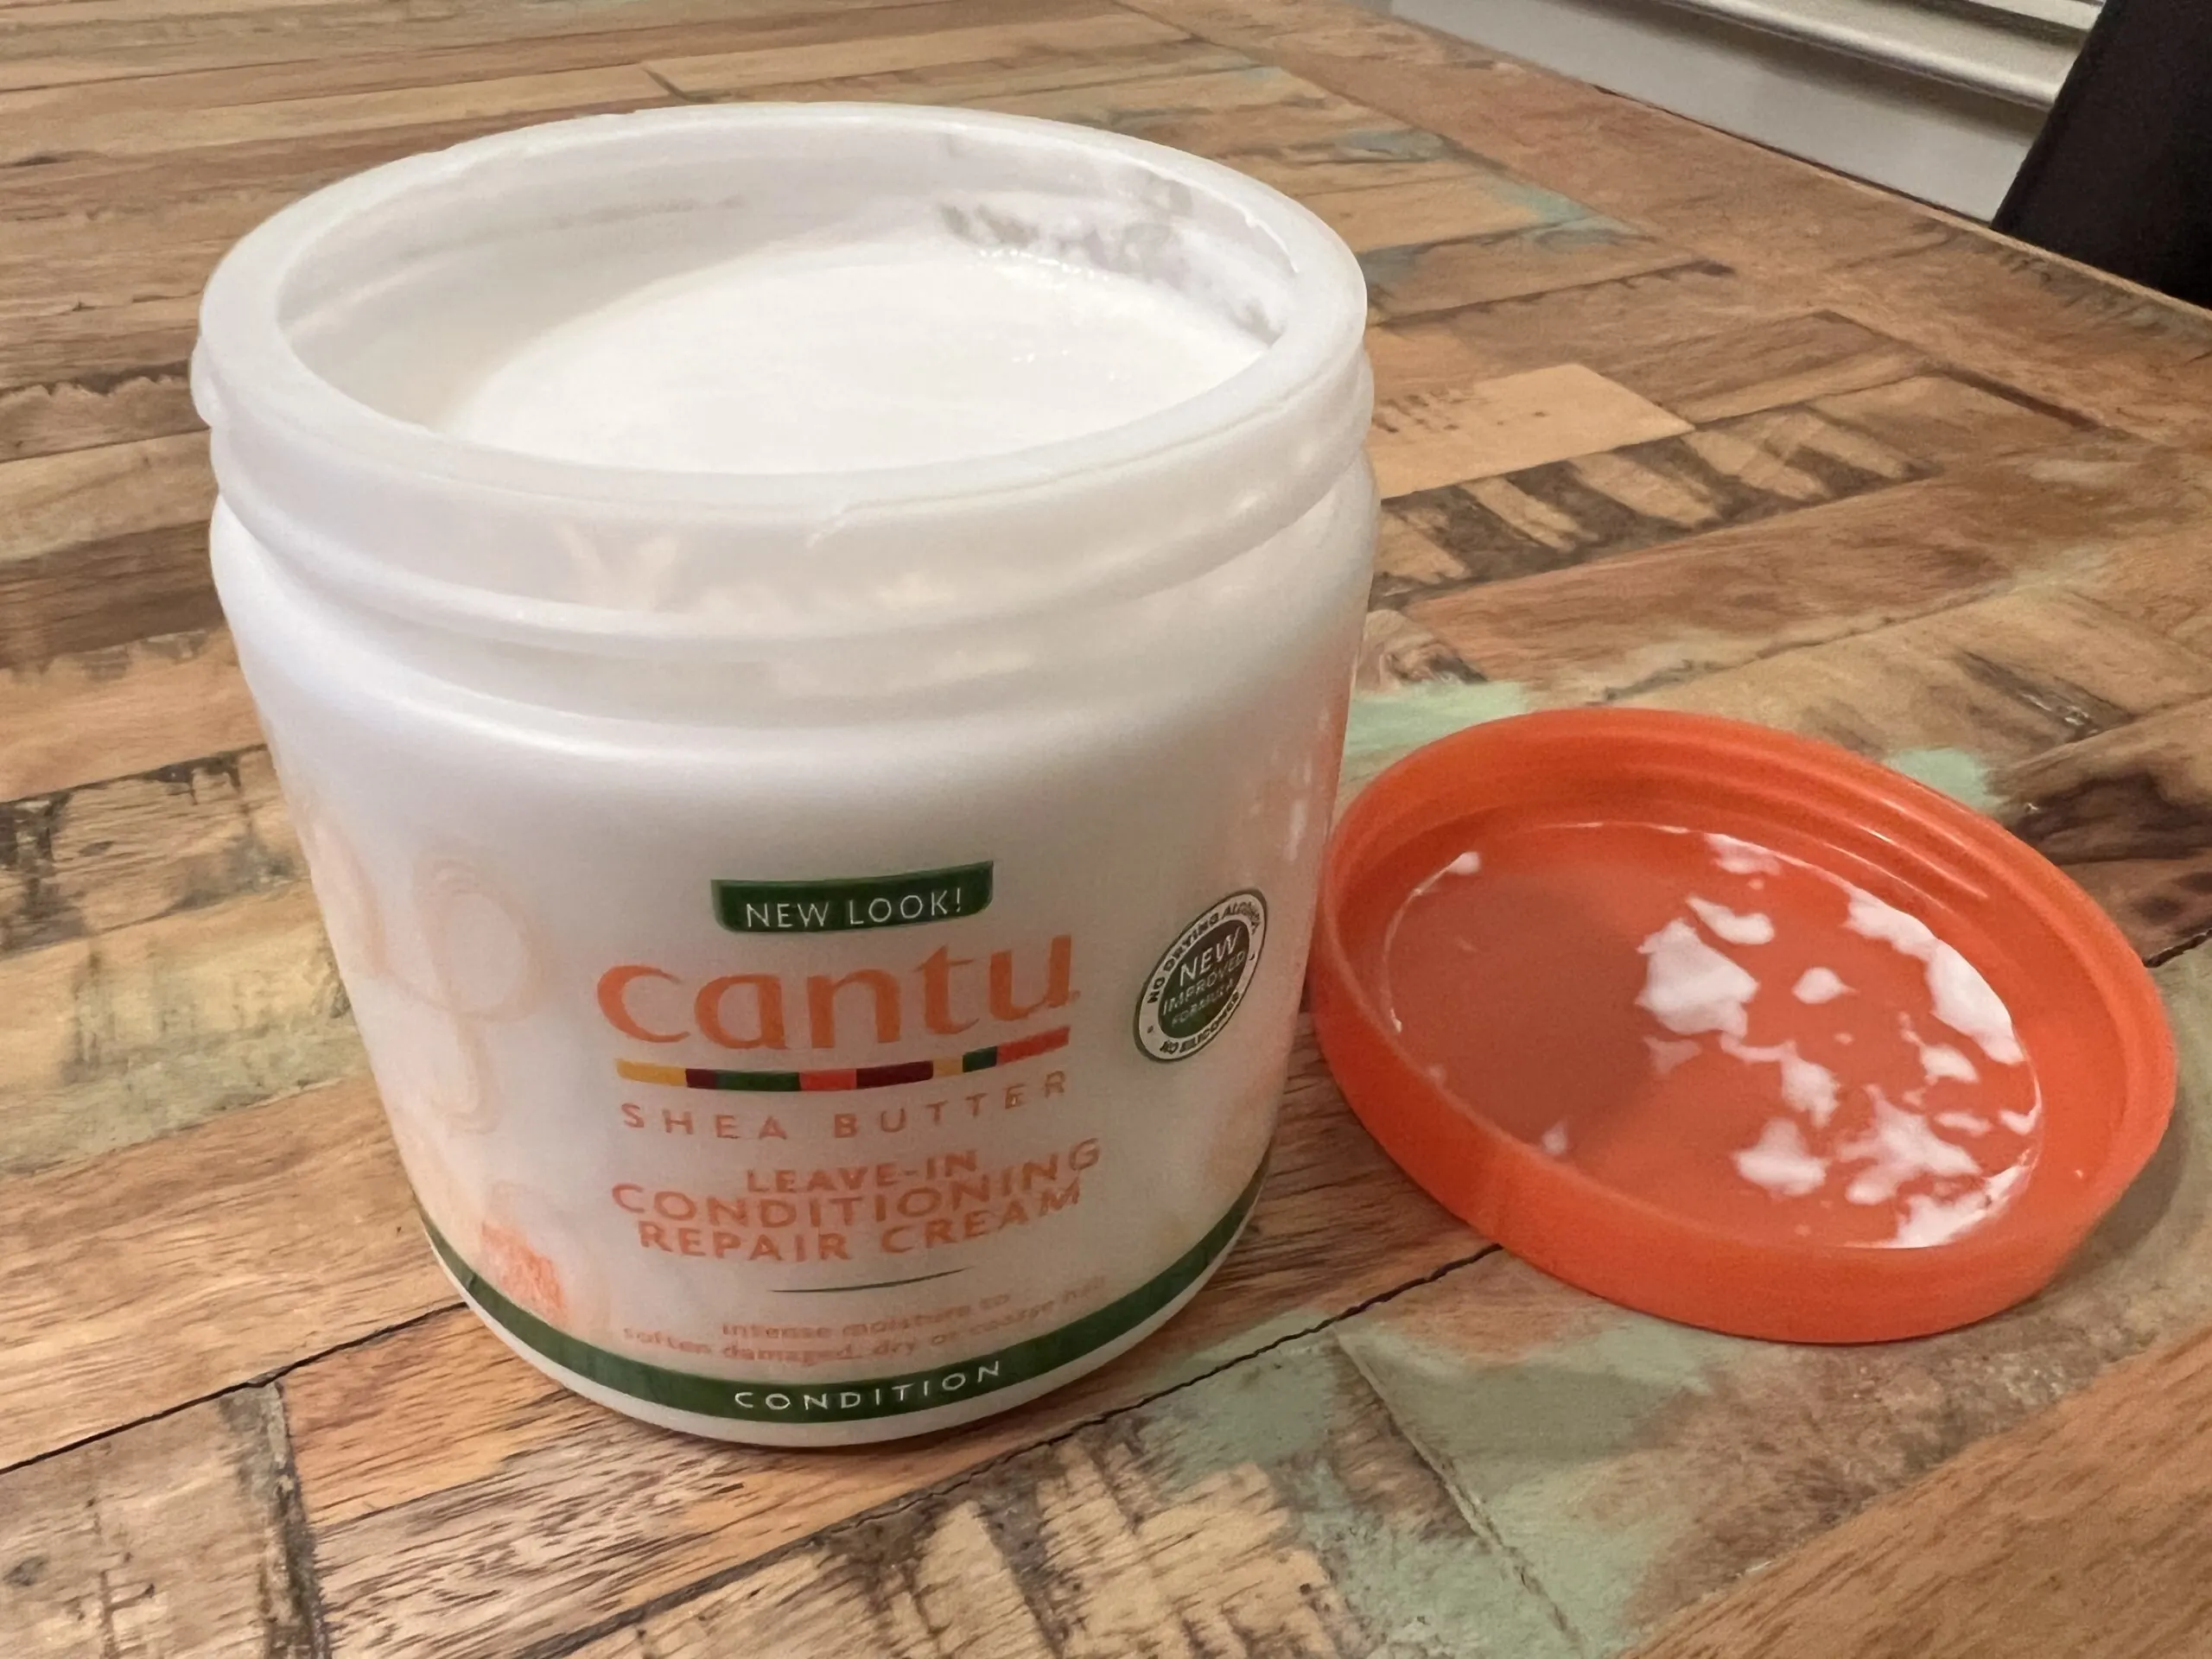 Close-up view of the rich, creamy texture of Cantu Leave-In Conditioning Repair Cream, highlighting its moisturizing properties for hair care.